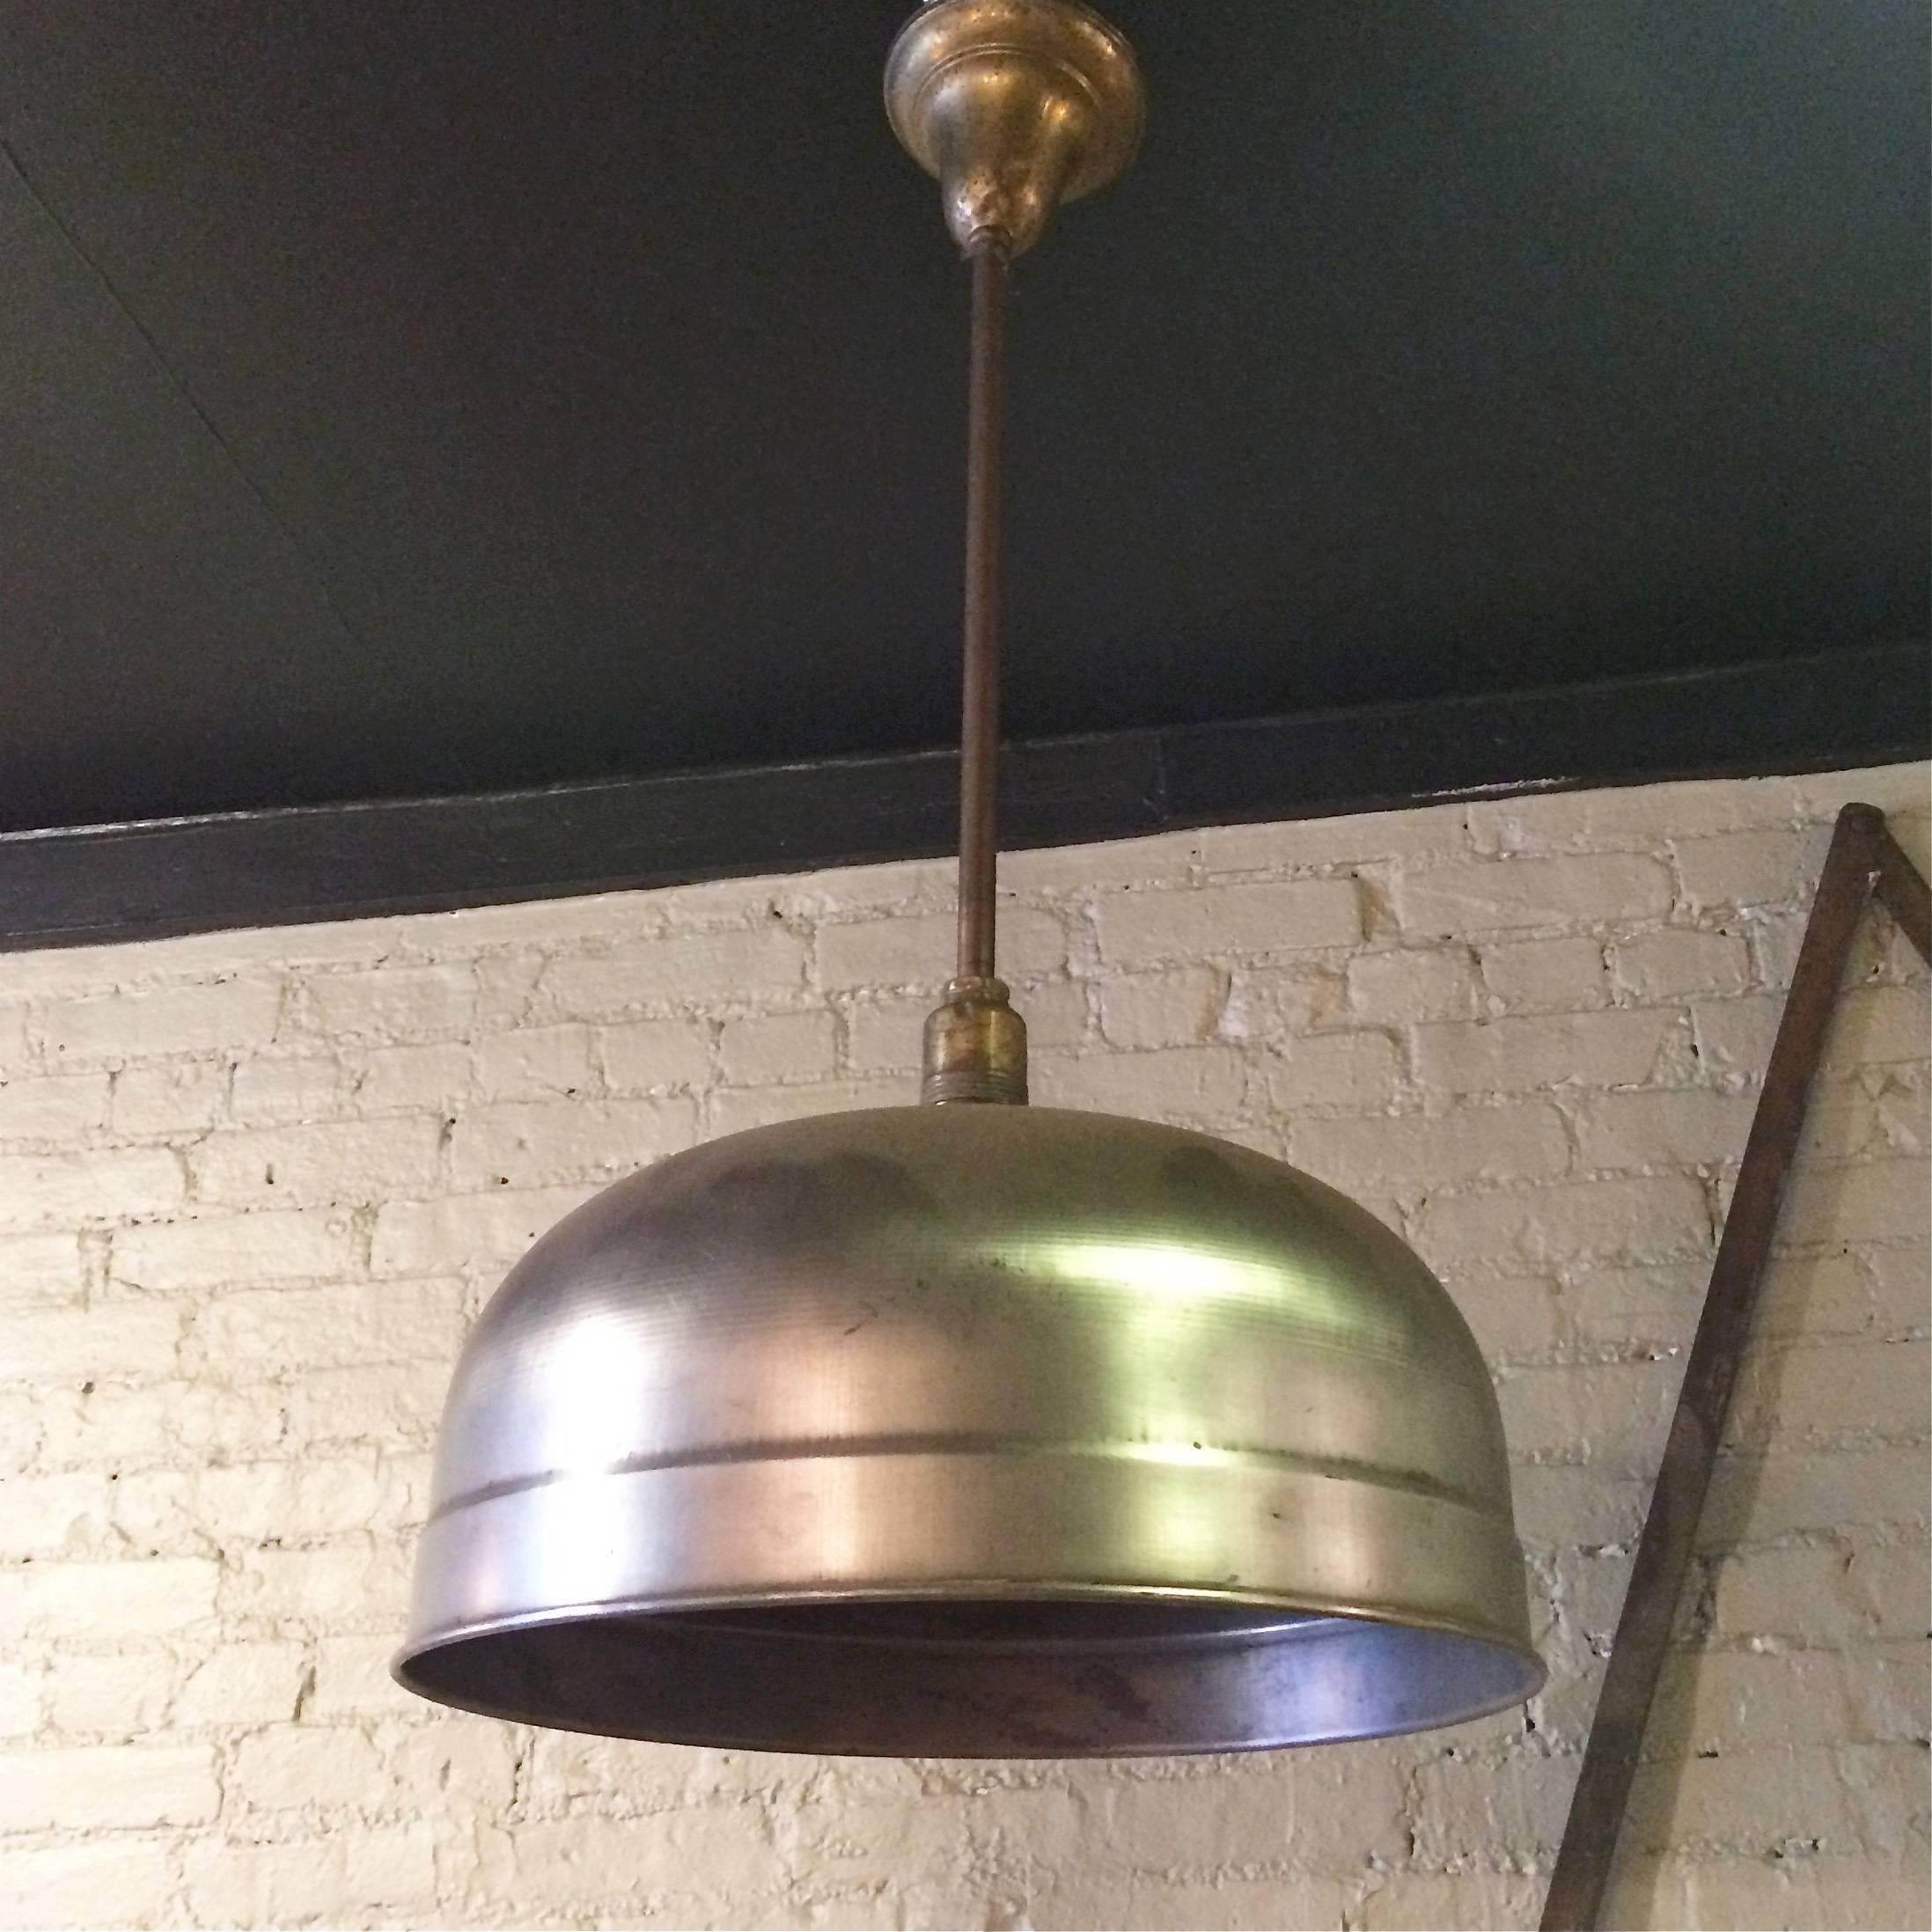 Industrial, billiard pendant light by Brunswick Co. features a brushed steel dome shade on a pole with brass canopy.